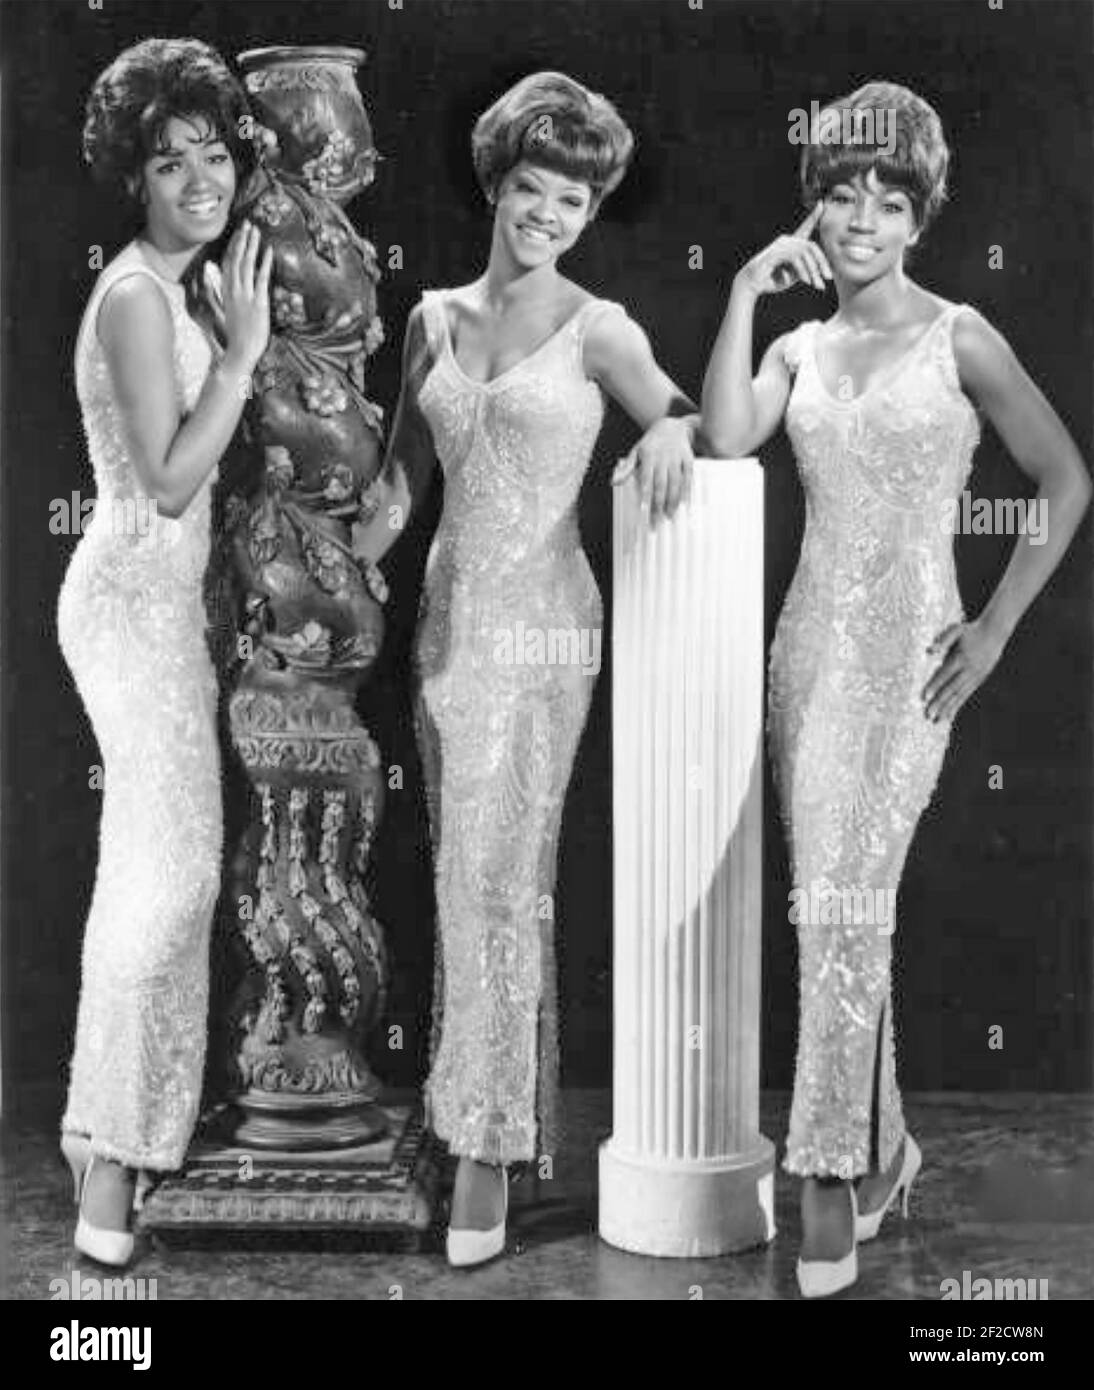 THE THREE DEGREES promotional photo of American vocal trio about 1963 Stock Photo